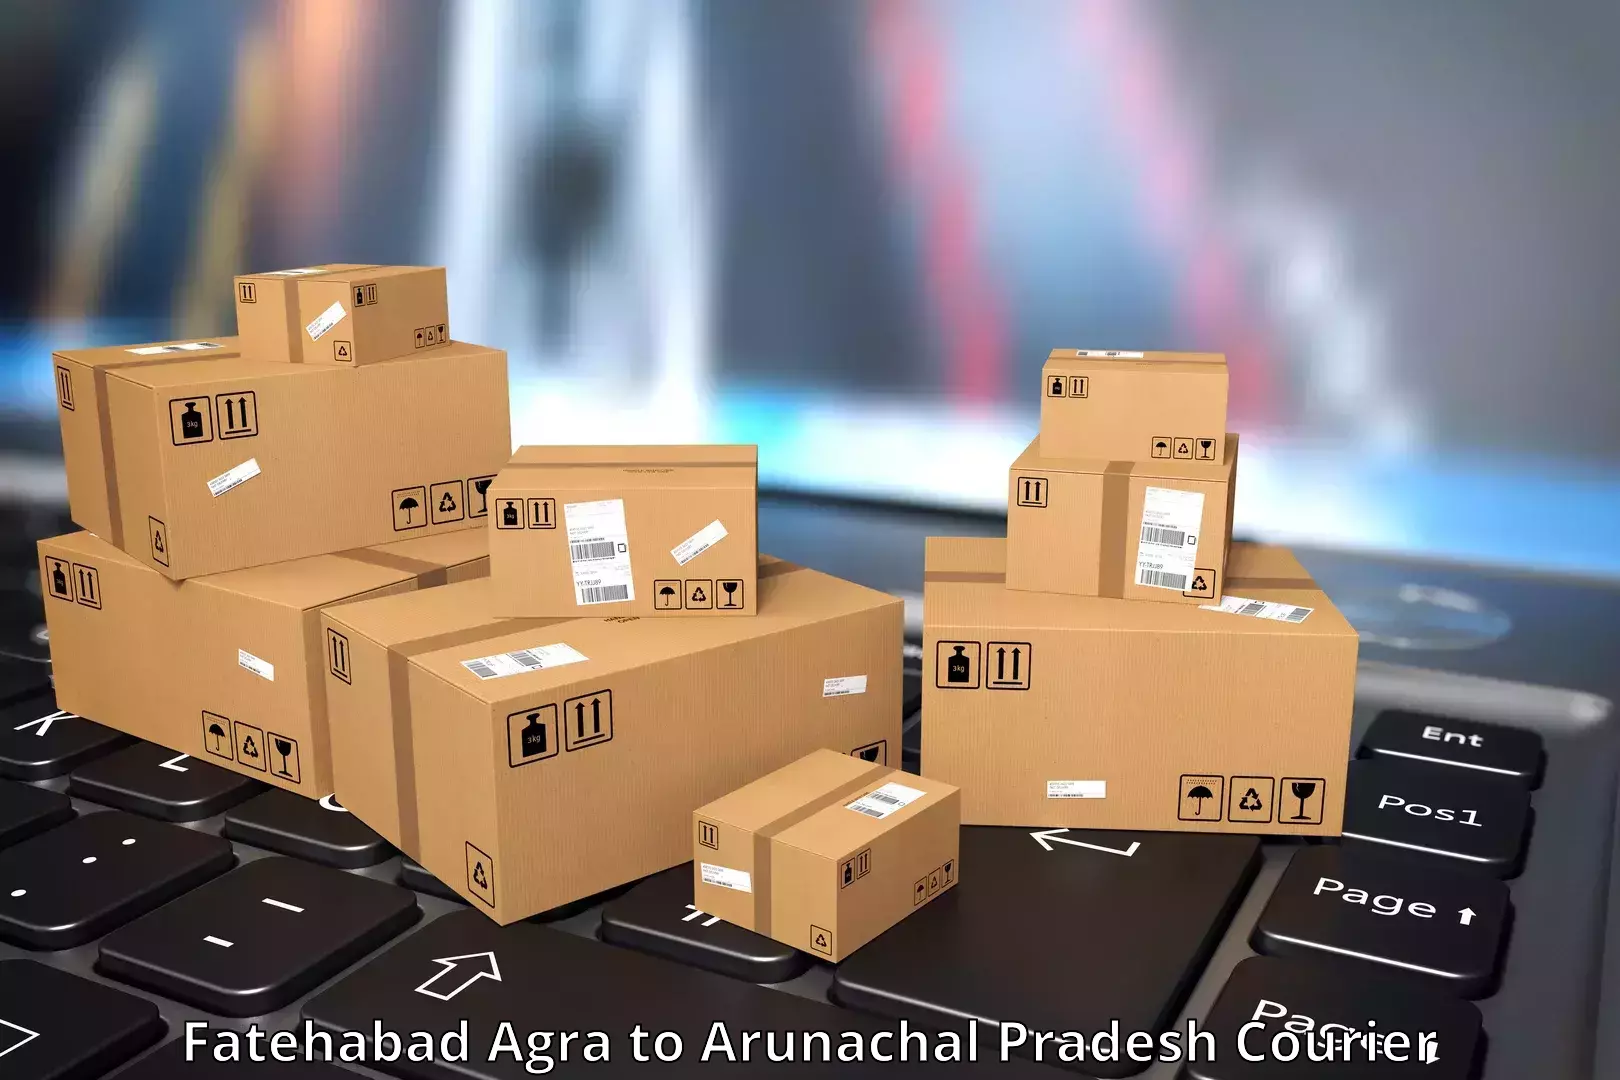 High-capacity shipping options in Fatehabad Agra to Boleng